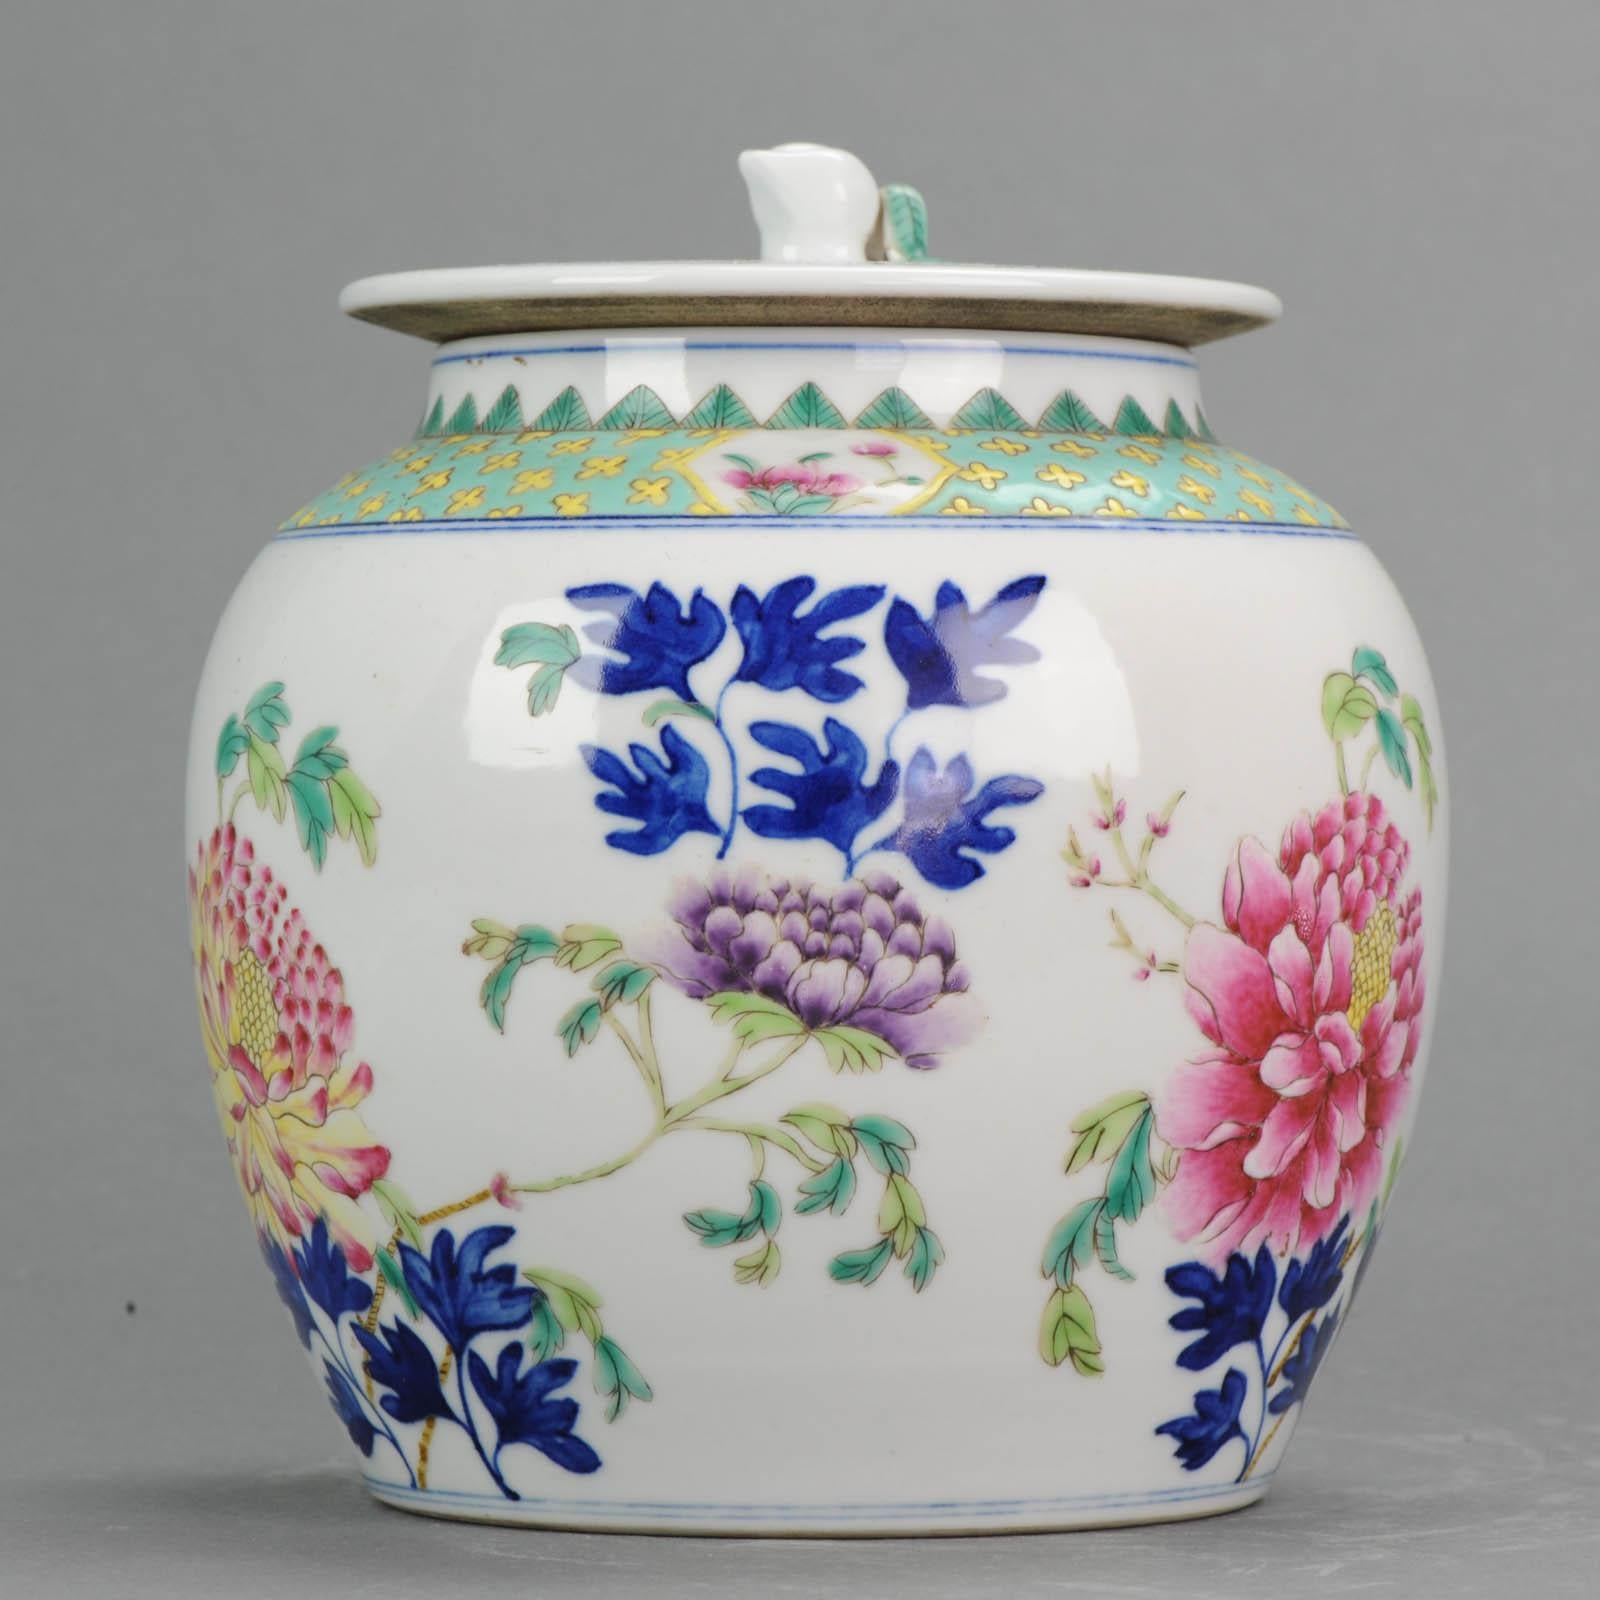 Lovely Chinese Porcelain Lidded Jar, amazing colors and patterns.

Bought in Hong Kong in 1978Lovely Chinese Porcelain Ginger Jar.. marked base

Condition
Overall condition, perfect. Size 170mm high

Period
20th century PRoC